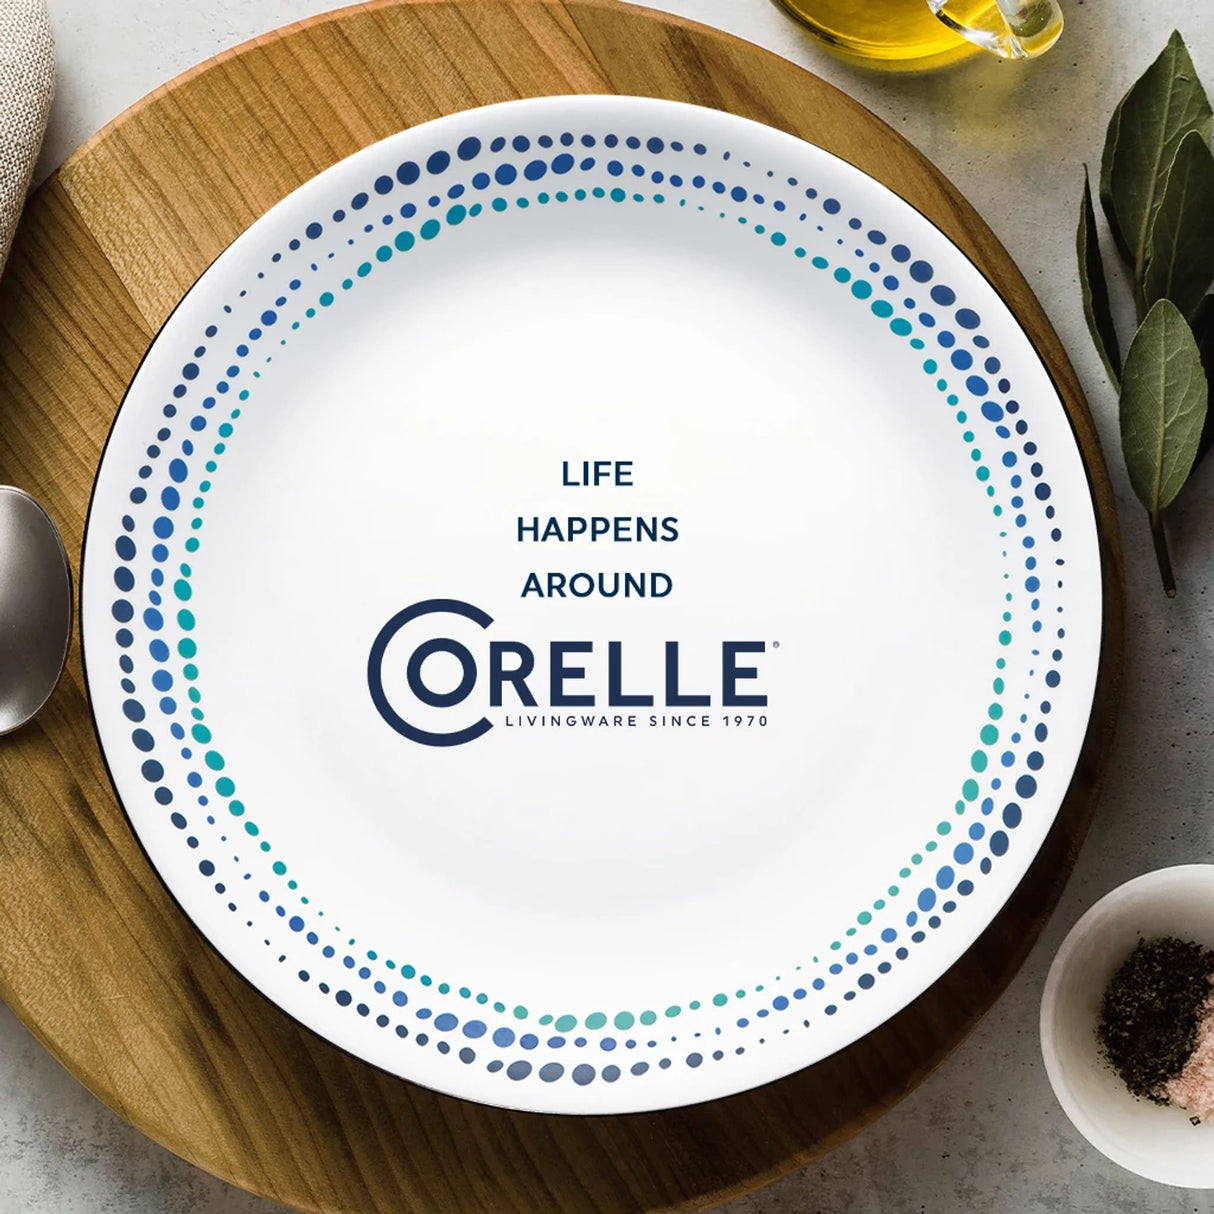  Ocean Blue dinner plate with text life happens around Corelle